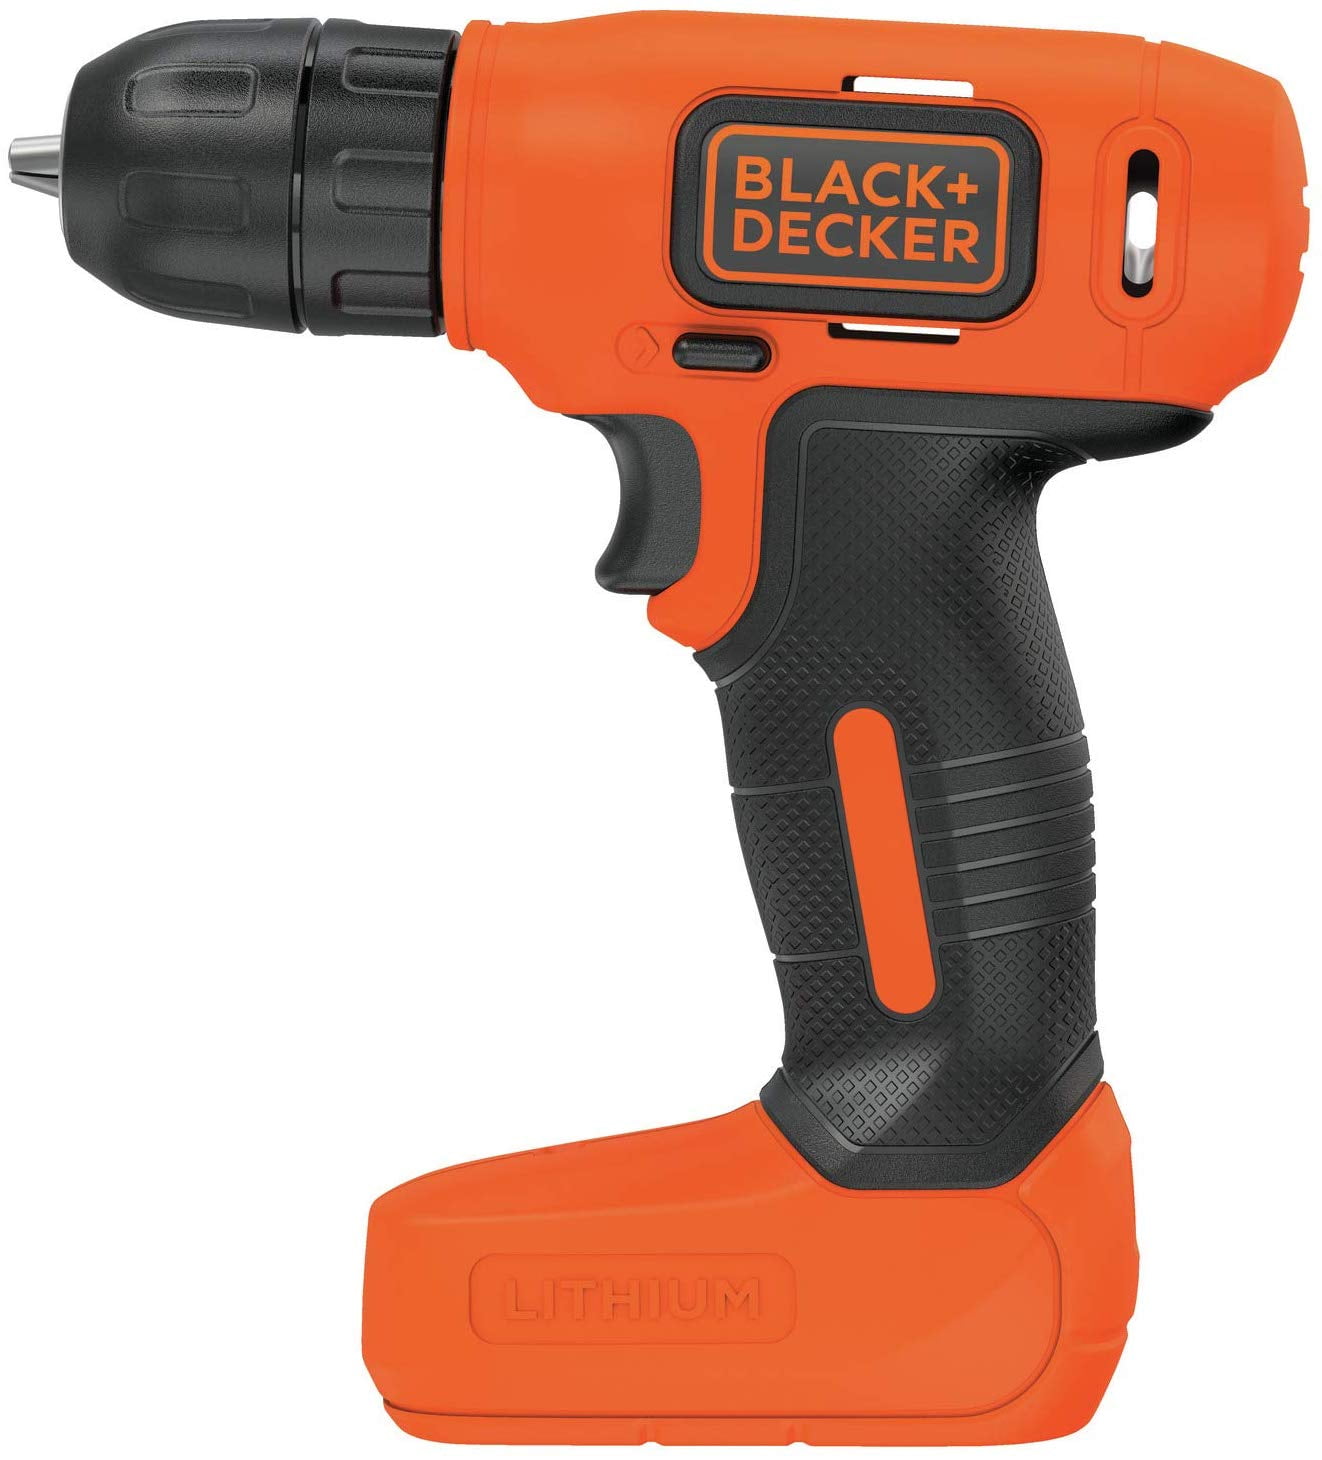 Black and Decker 7.2v cordless drill LDX172 lithium drill & battery no  charger